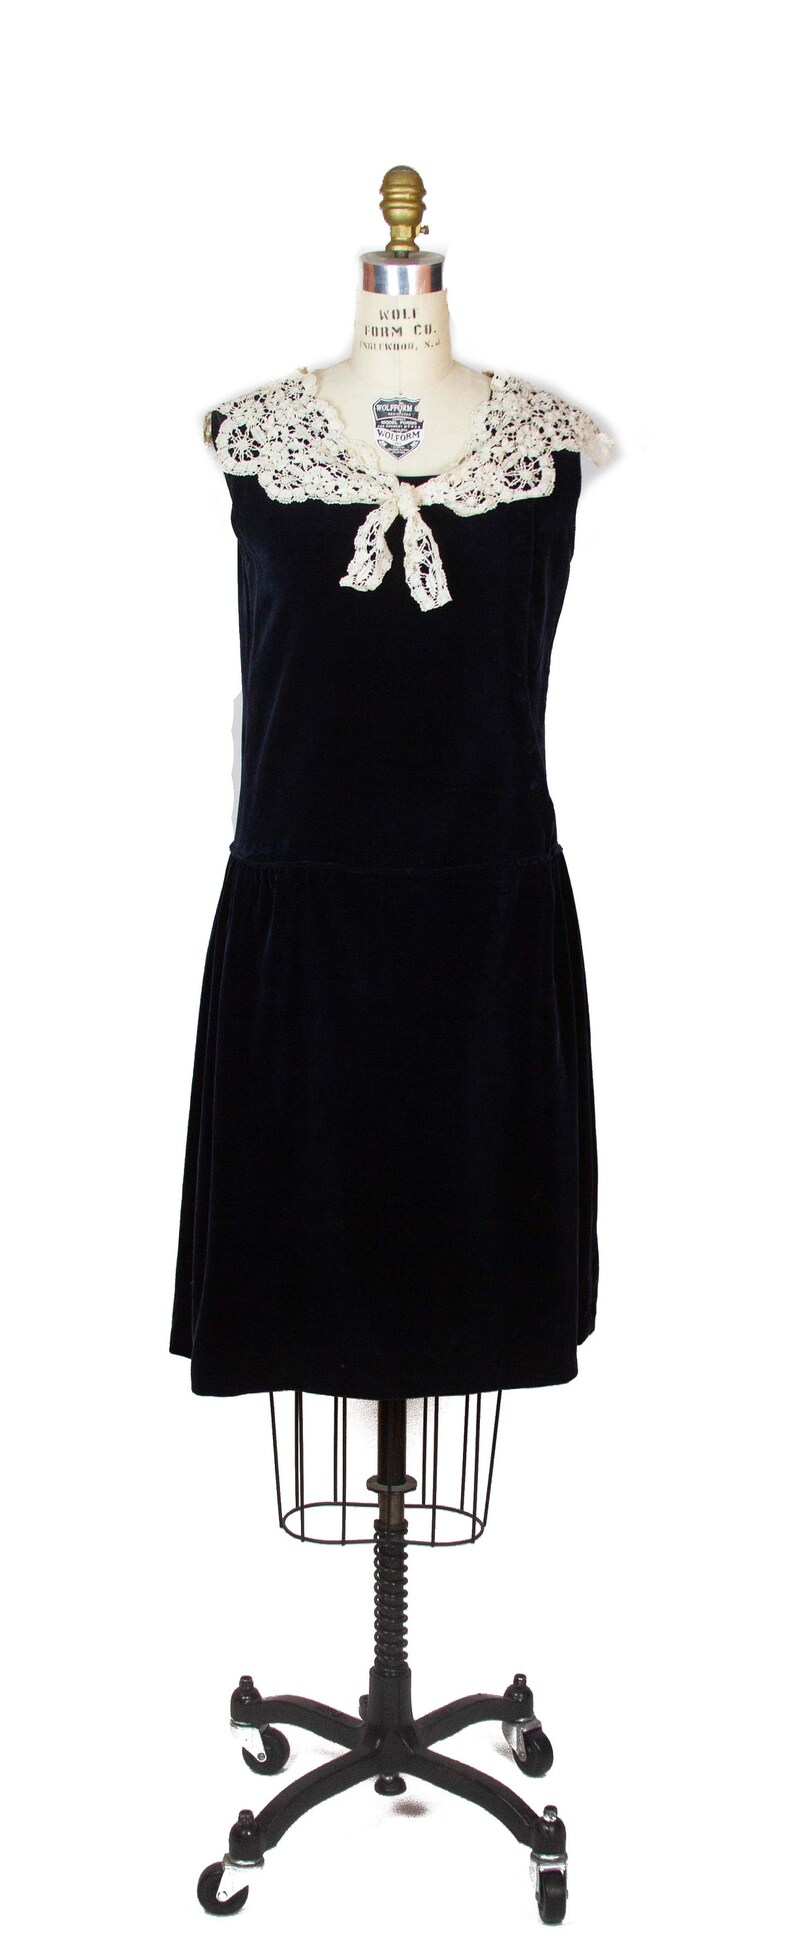 1920s Dress Black Velveteen Flapper Dress with White Lace Collar image 2